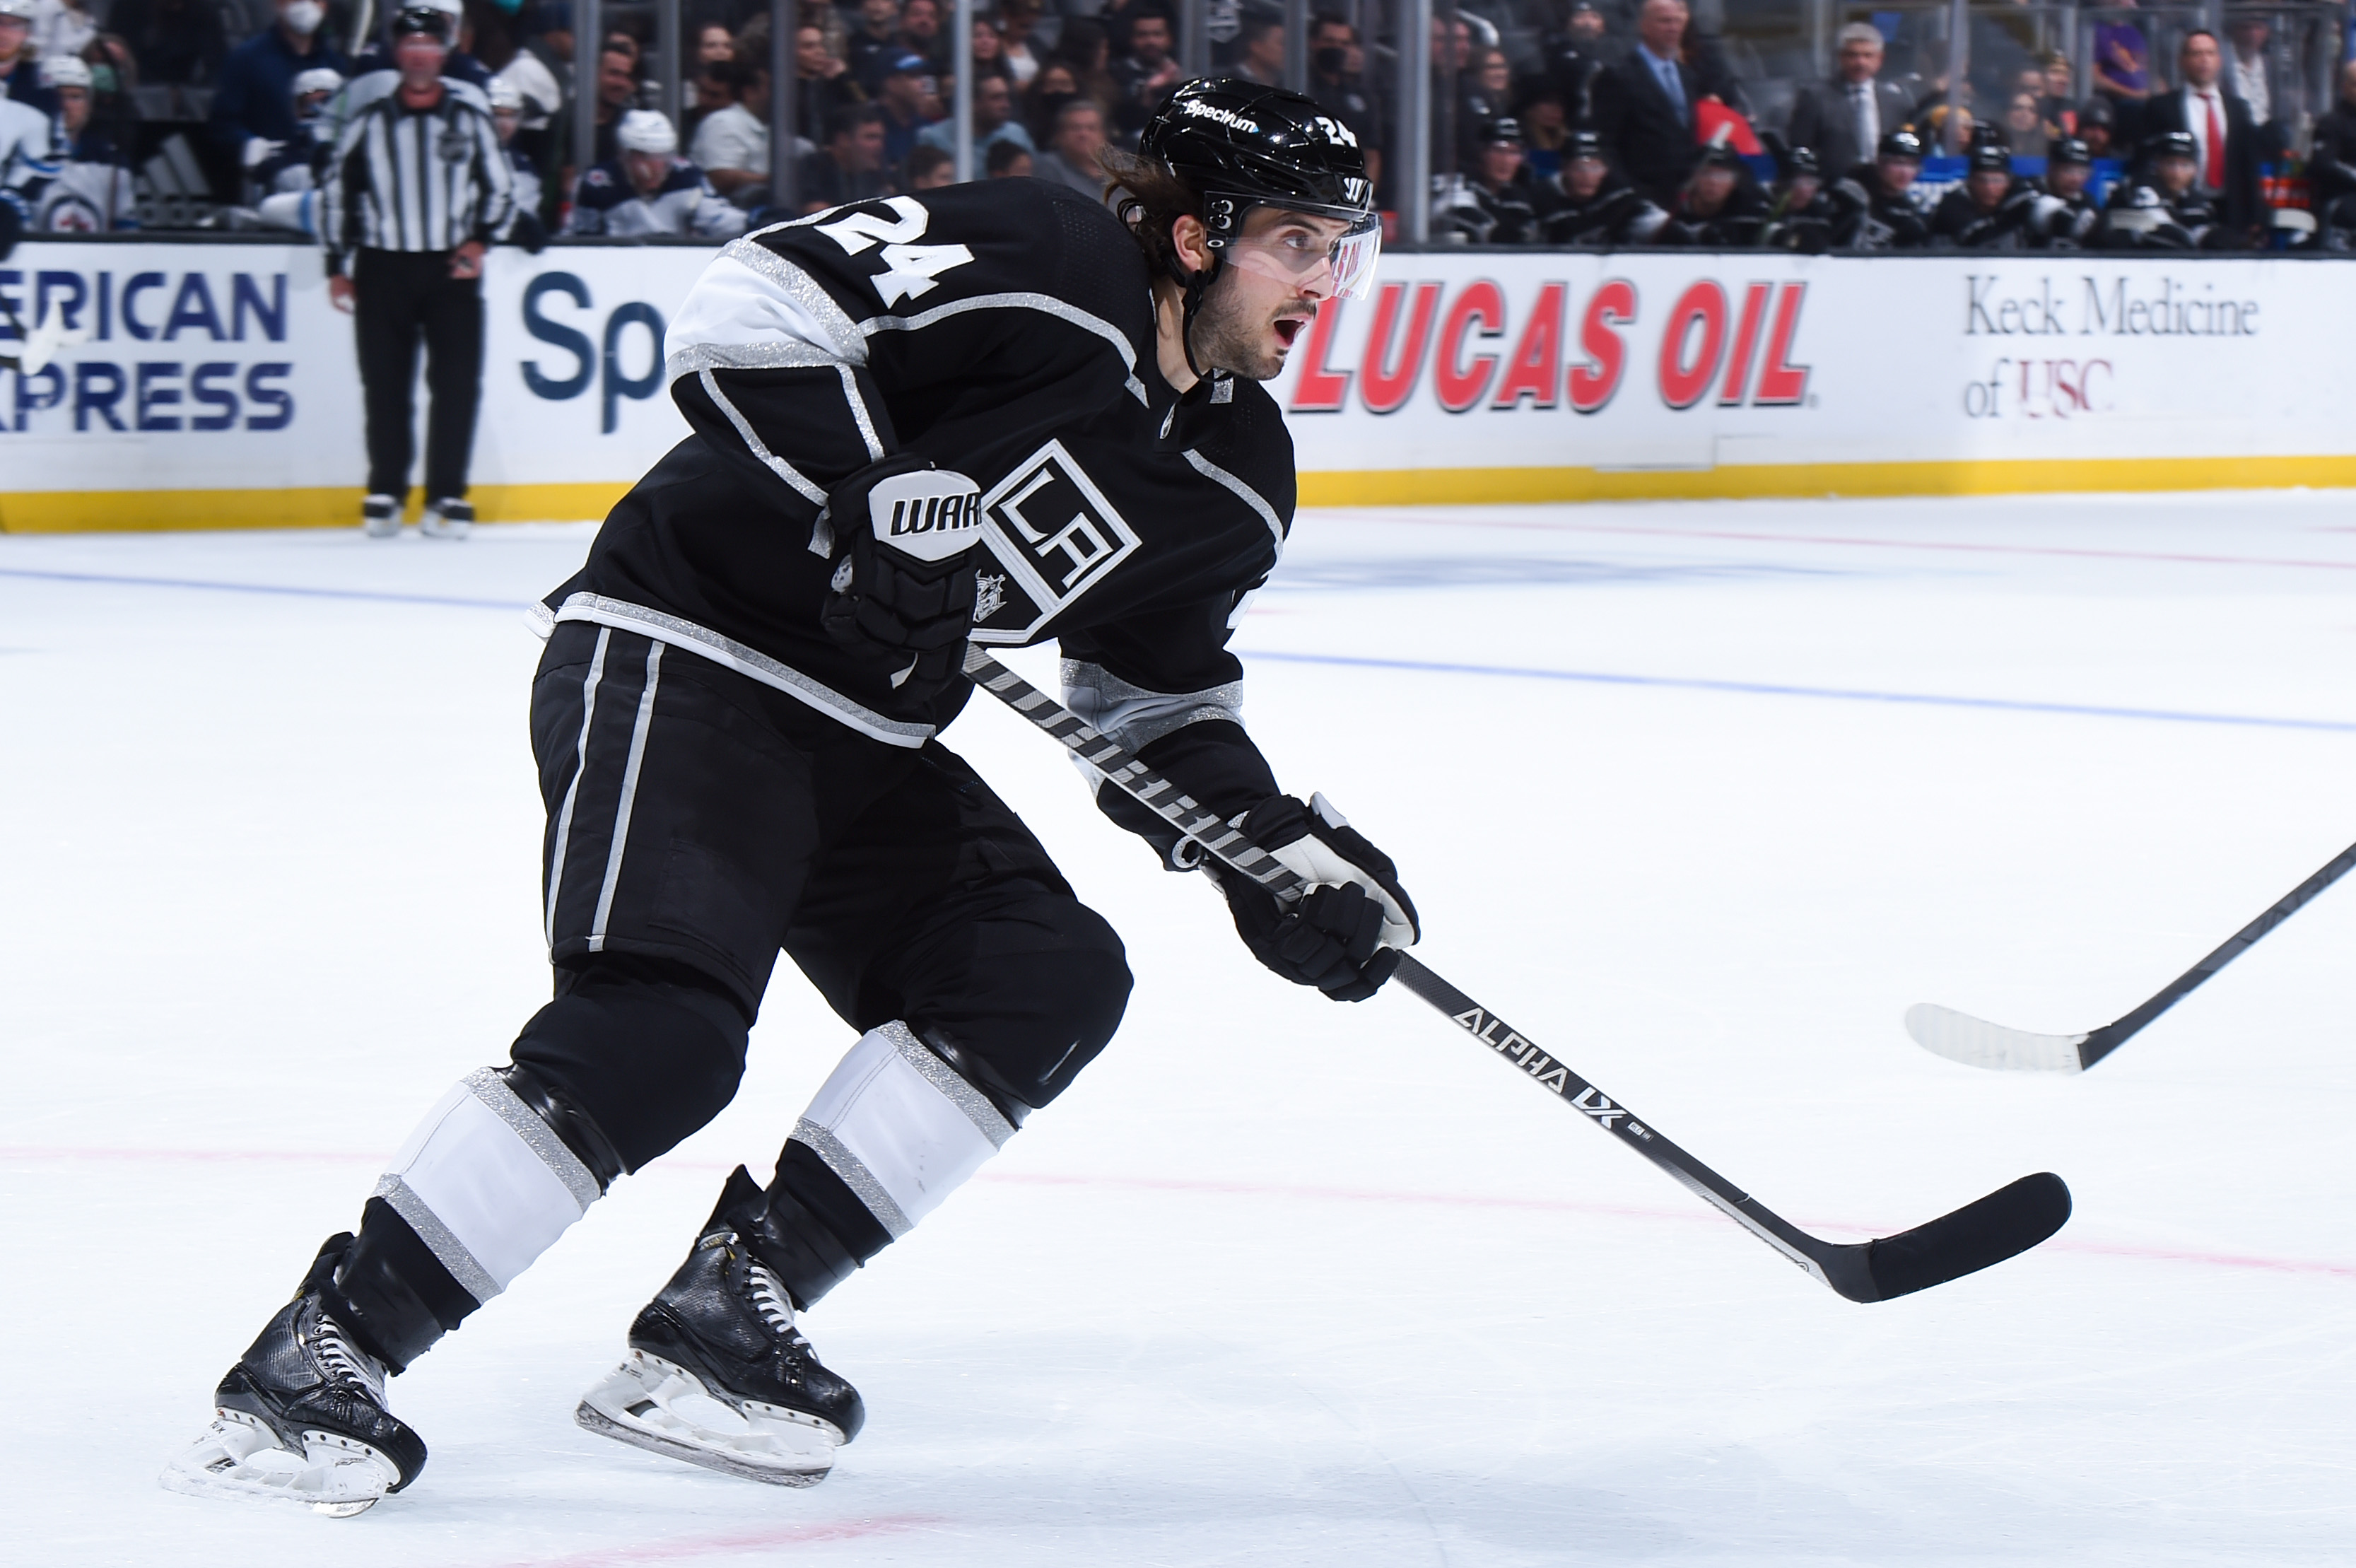 Phillip Danault #24 of the Los Angeles Kings skates on the ice during the second period against the Winnipeg Jets at STAPLES Center on October 28, 2021 in Los Angeles, California.